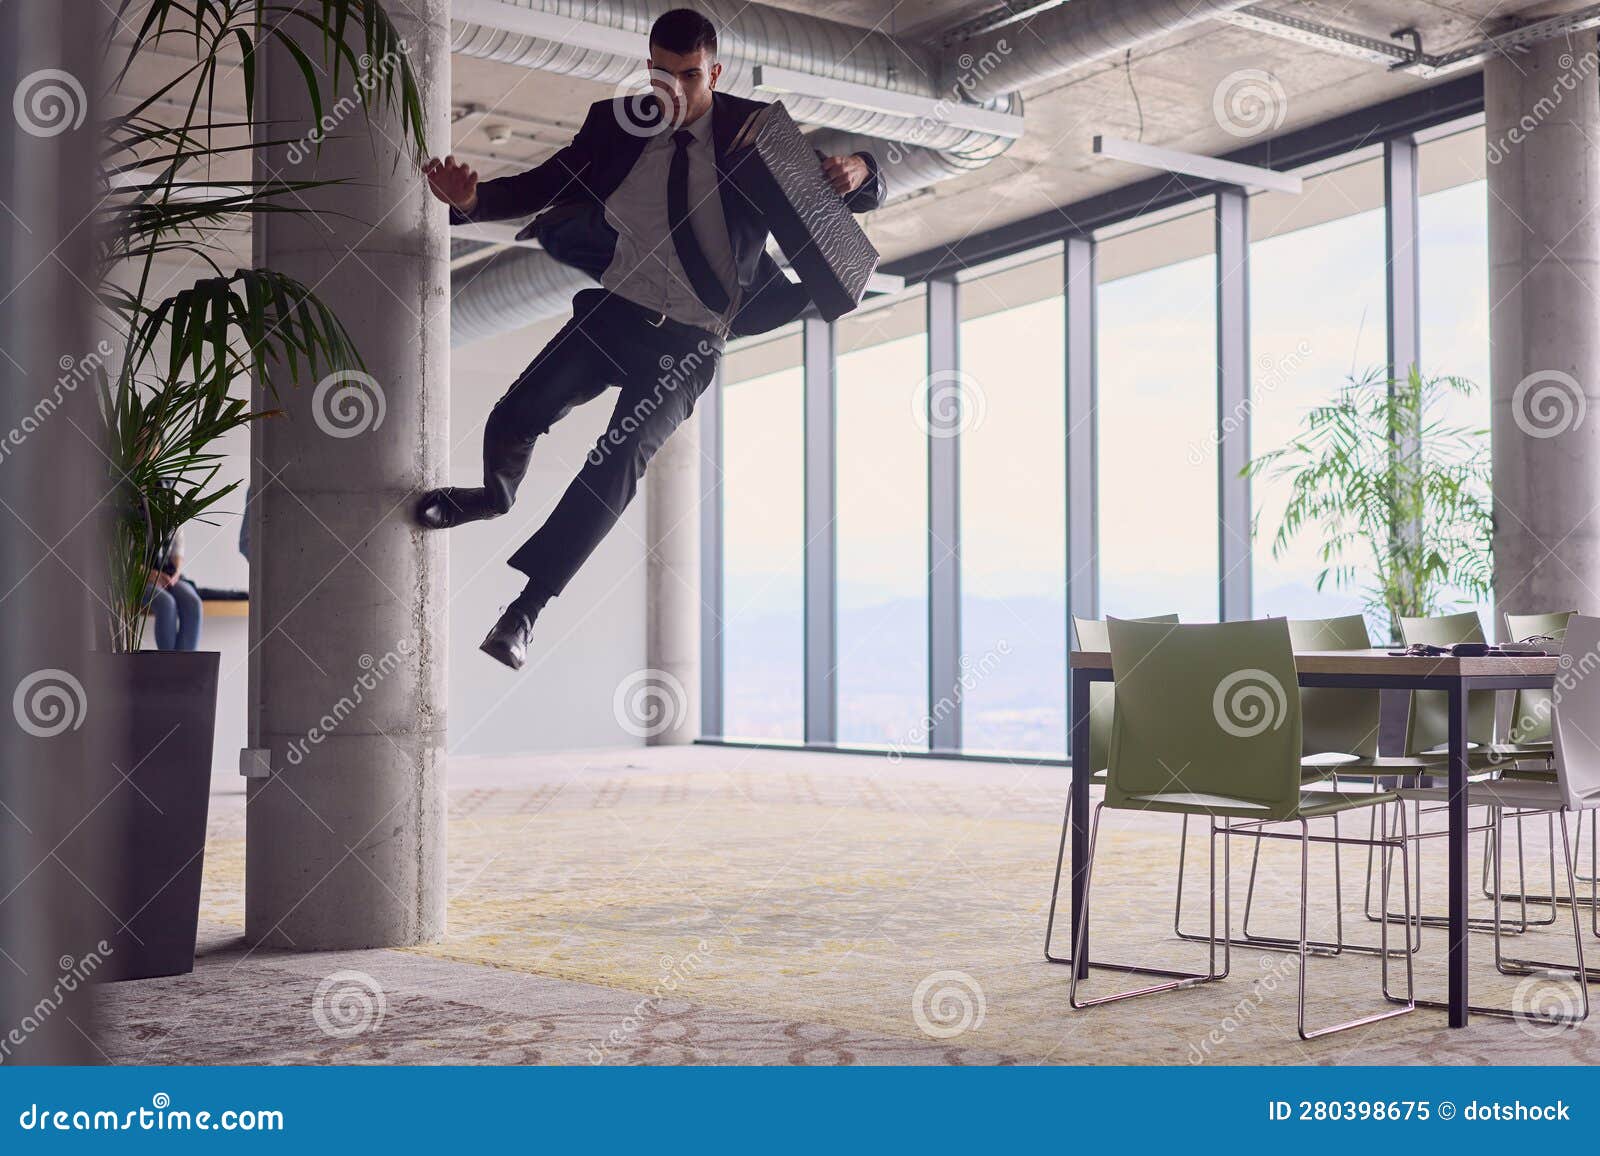 in the modern office, a businessman with a briefcase captivates everyone as he performs thrilling aerial acrobatics